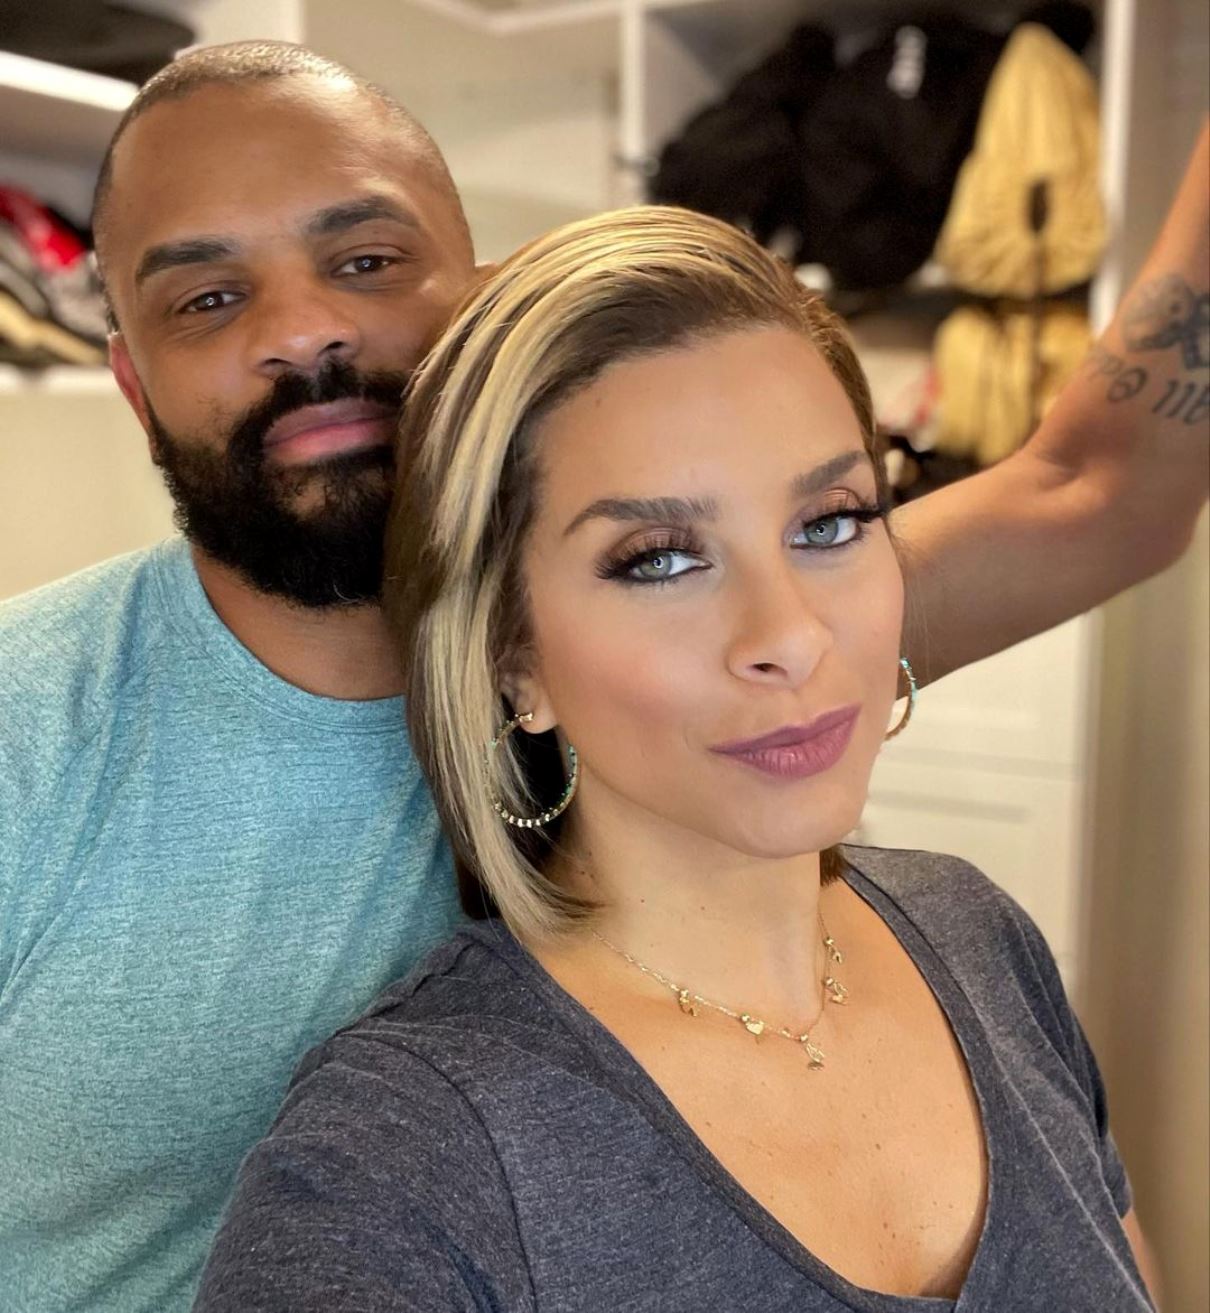 Juan Dixon and Robyn Dixon Address Hotel Room Controversy, as Juan Calls Situation “Foolish” in RHOP Preview, Plus Castmates Hint at More Accusations